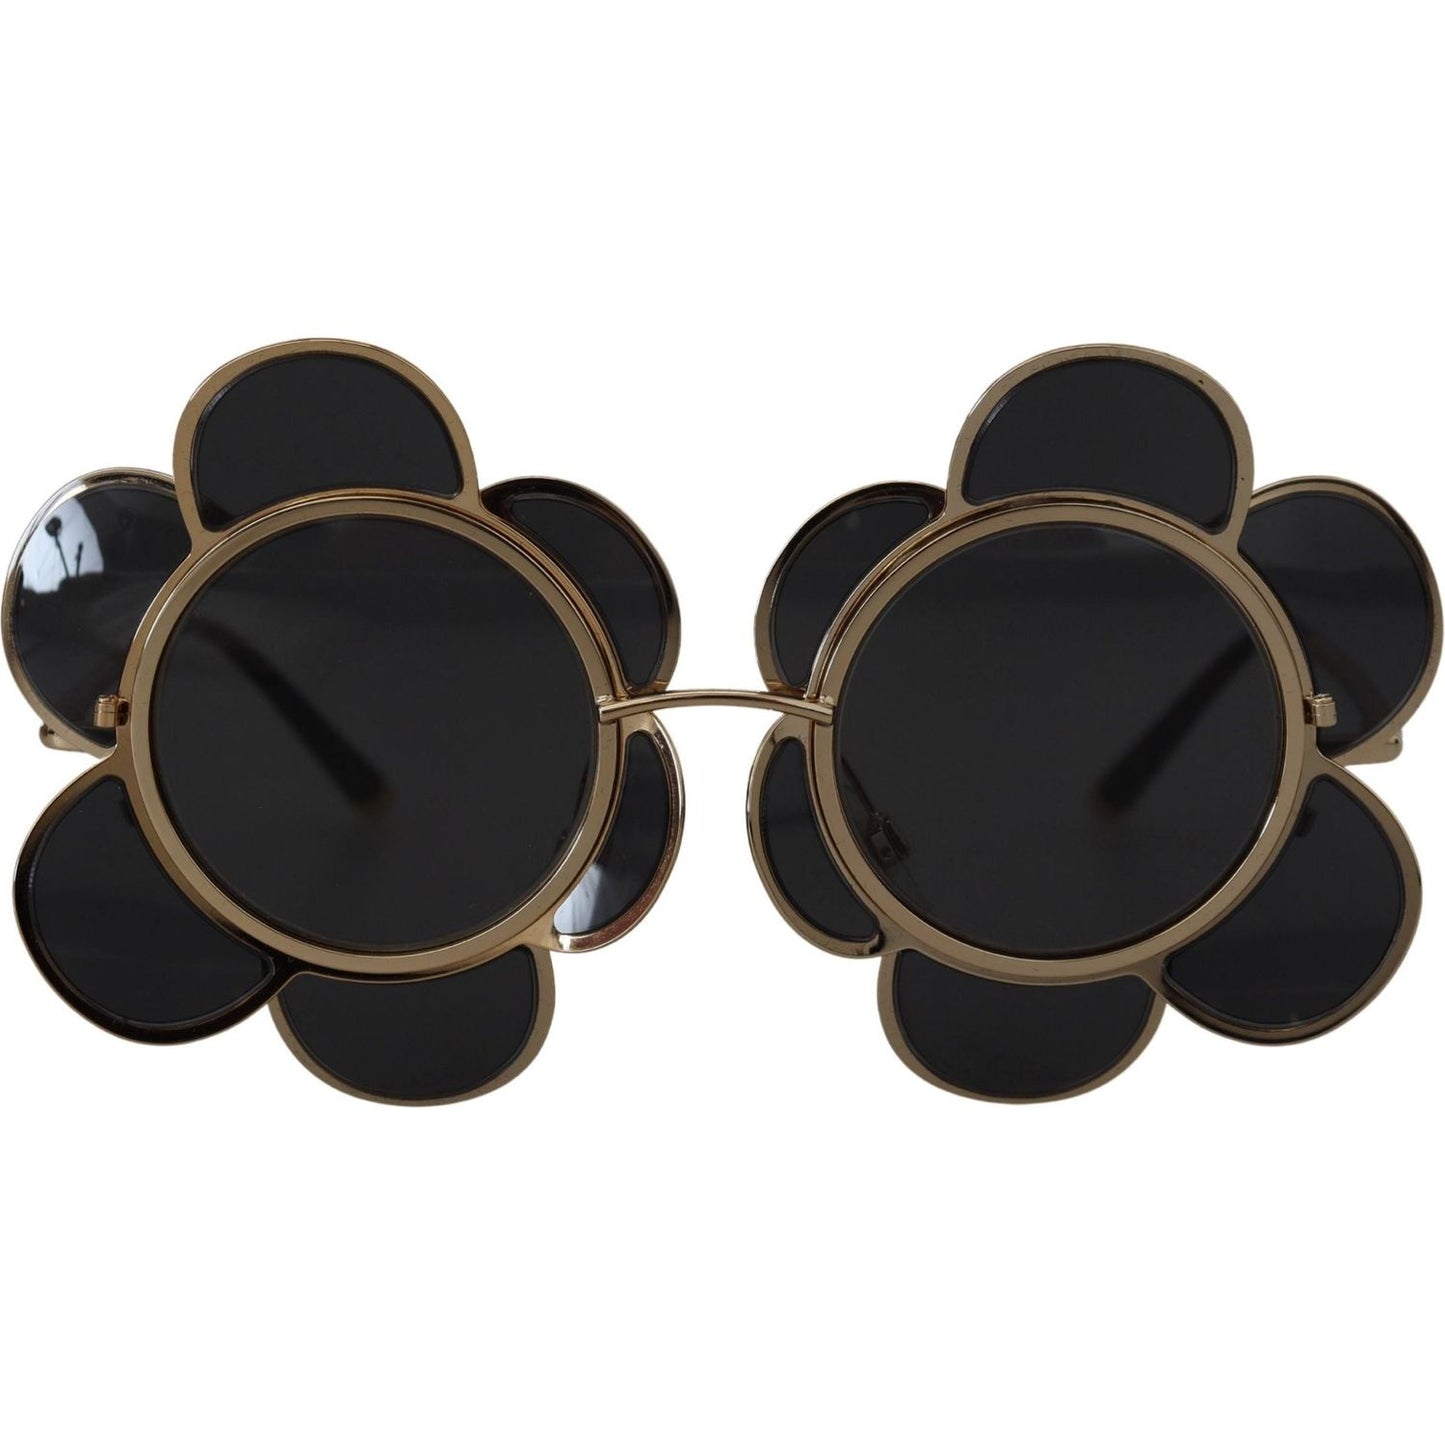 Dolce & Gabbana Chic Floral-Formed Black and Gold Sunglasses black-gold-special-edition-flower-form-dg2201-sunglasses